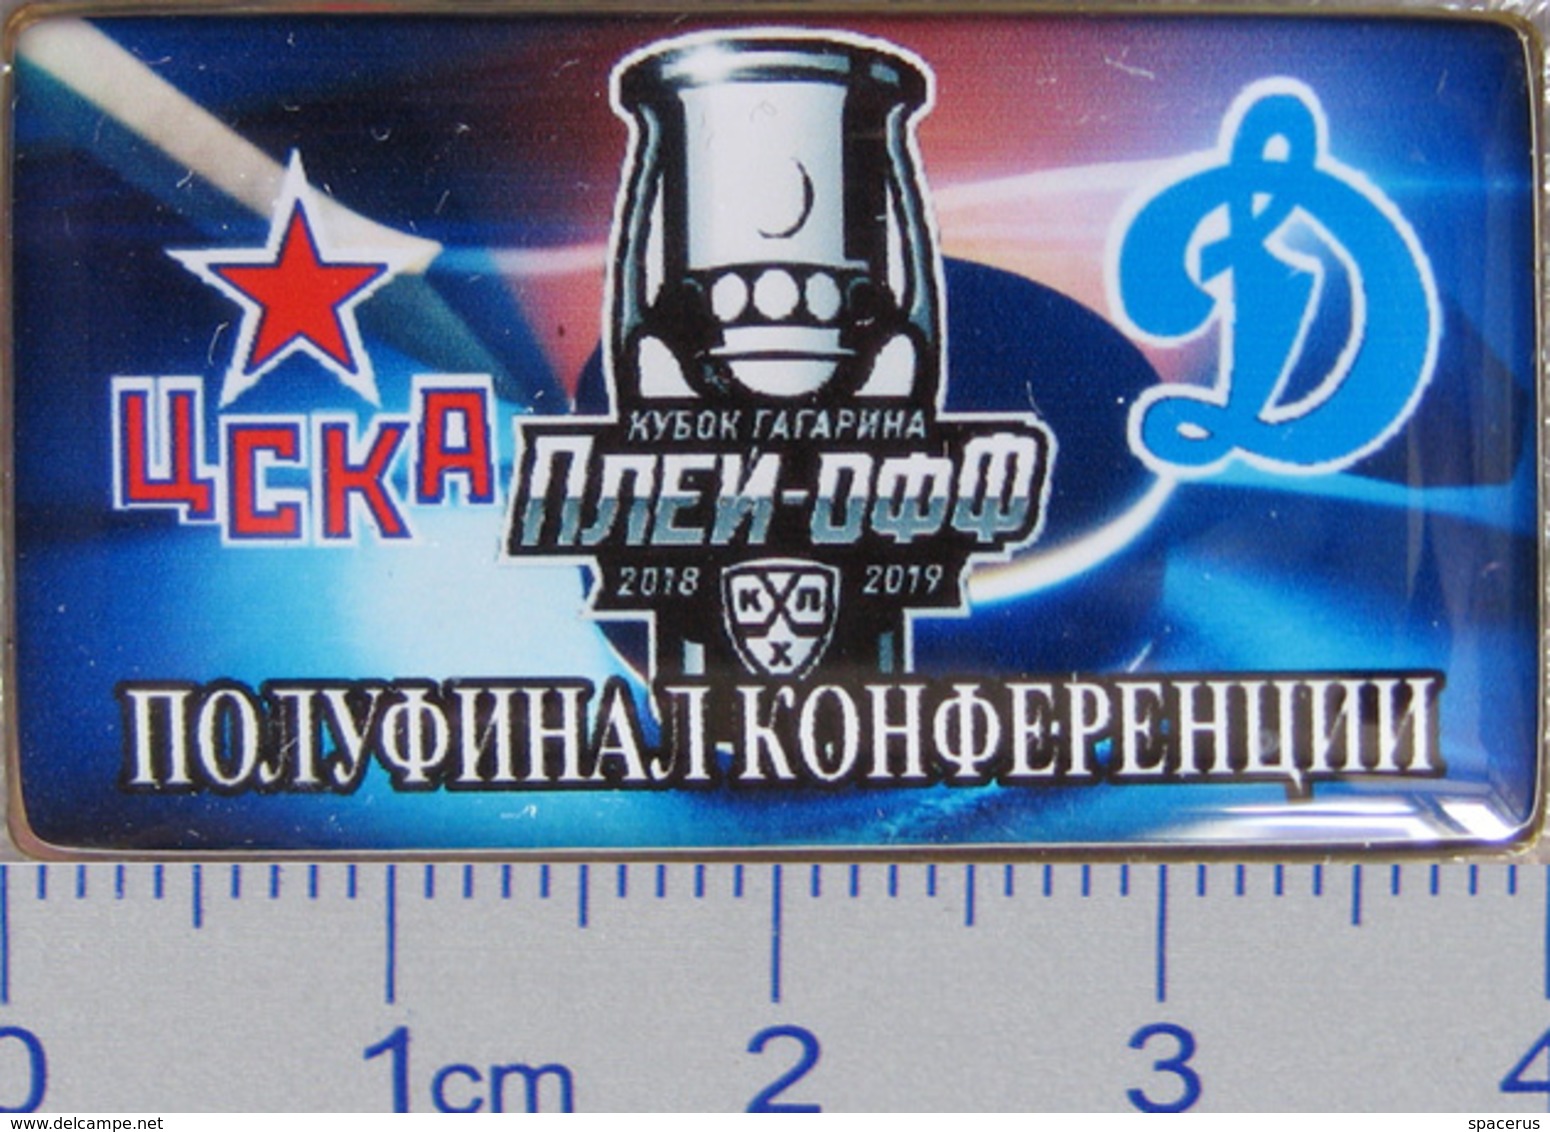 686-9 Space - Sport Russian Pin Hocky Gagarin Cup CSKA (Moscow) - Dynamo (Moscow) 2018-19 (40х22mm) - Space